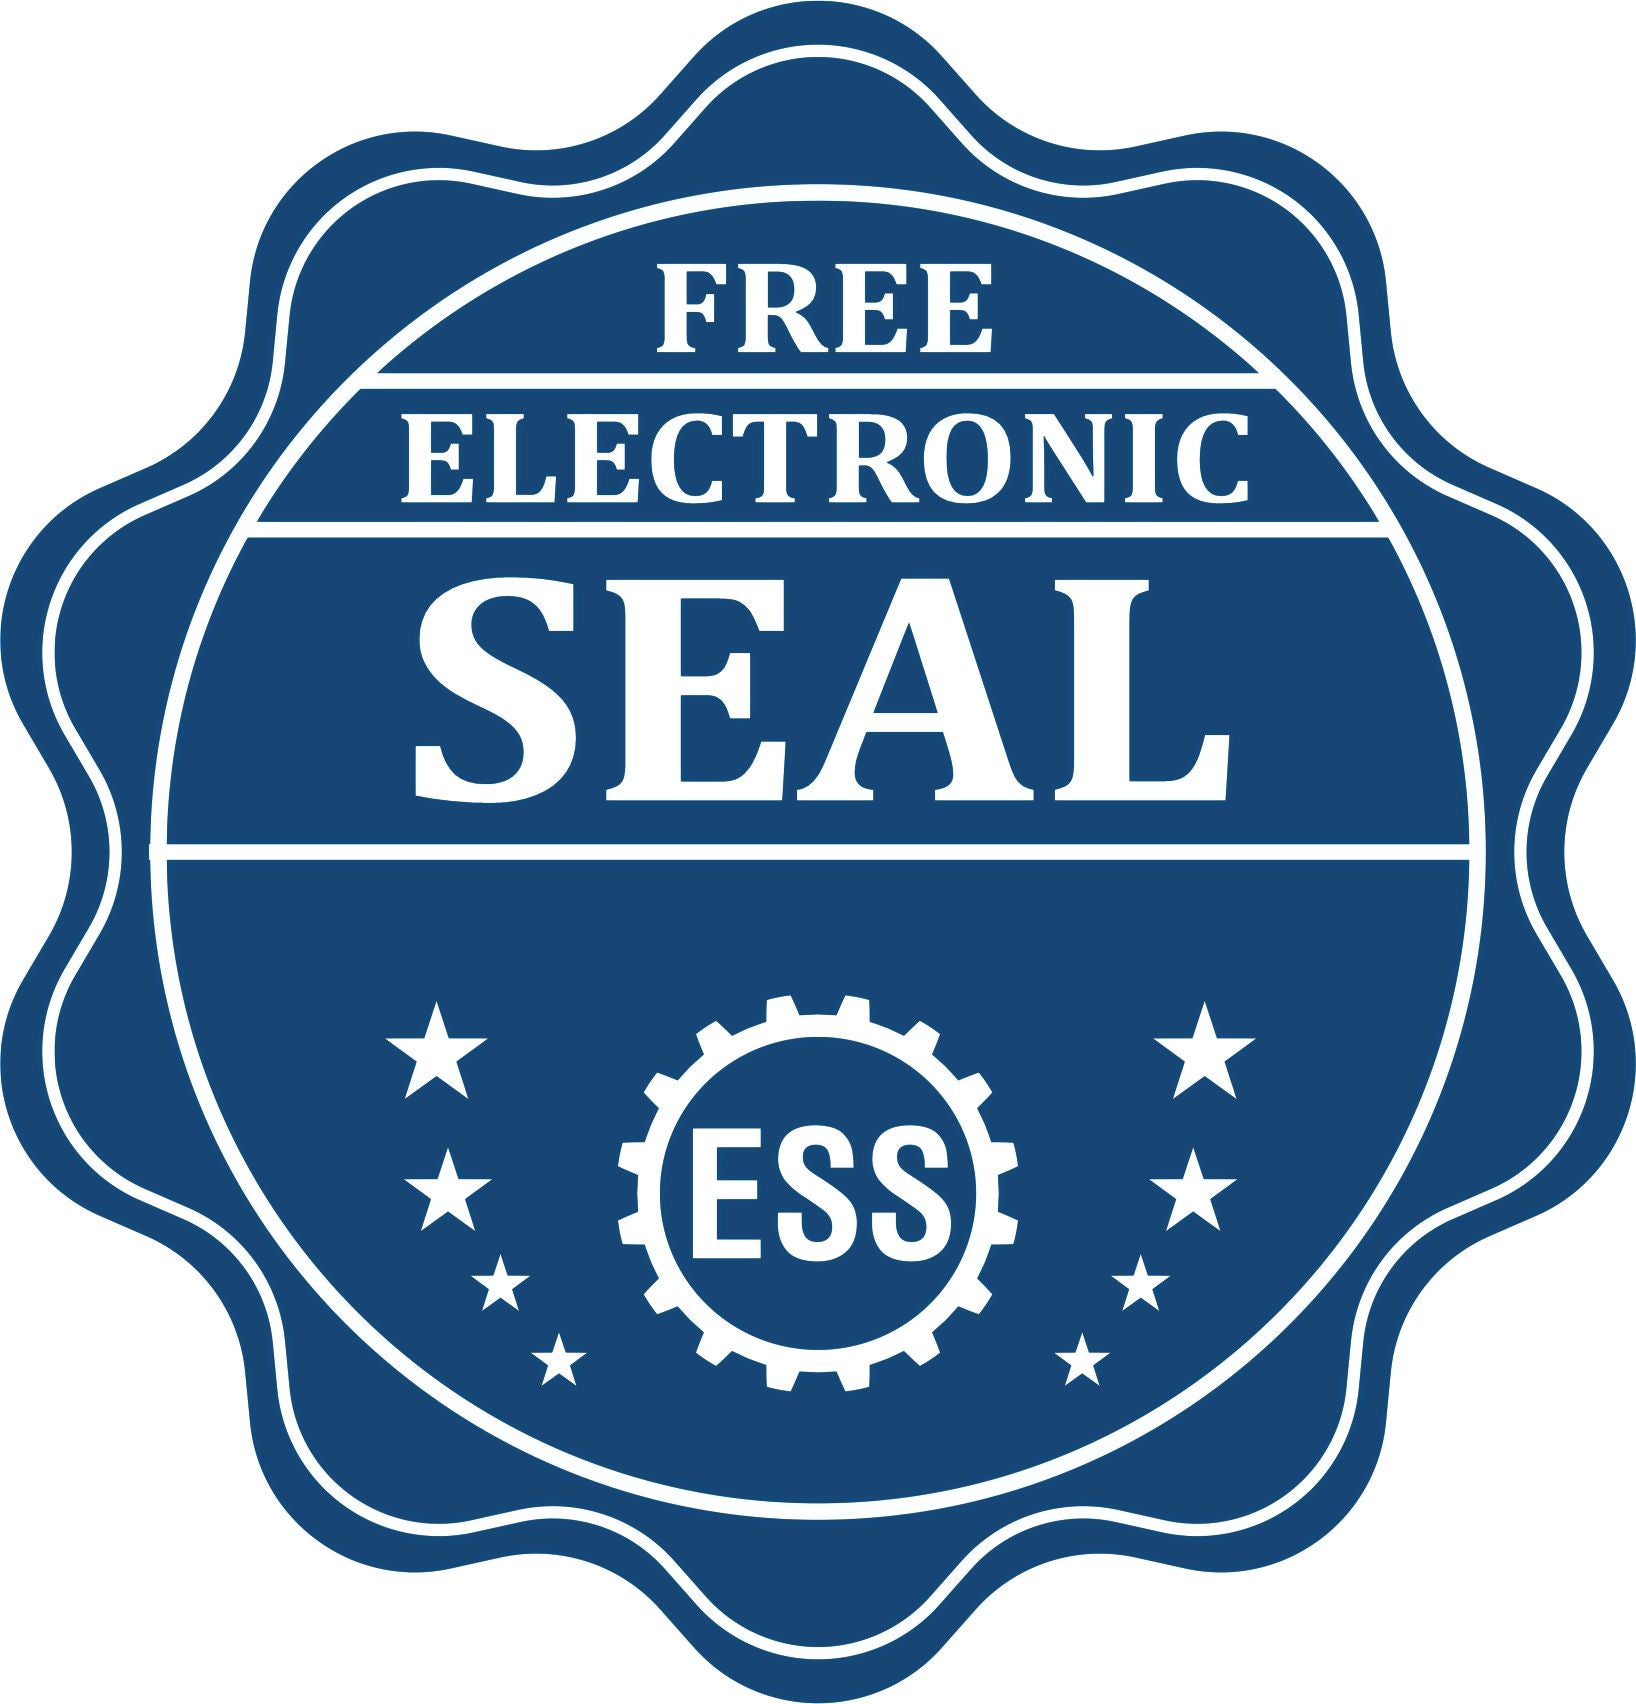 A badge showing a free electronic seal for the Heavy Duty Cast Iron Pennsylvania Geologist Seal Embosser with stars and the ESS gear on the emblem.